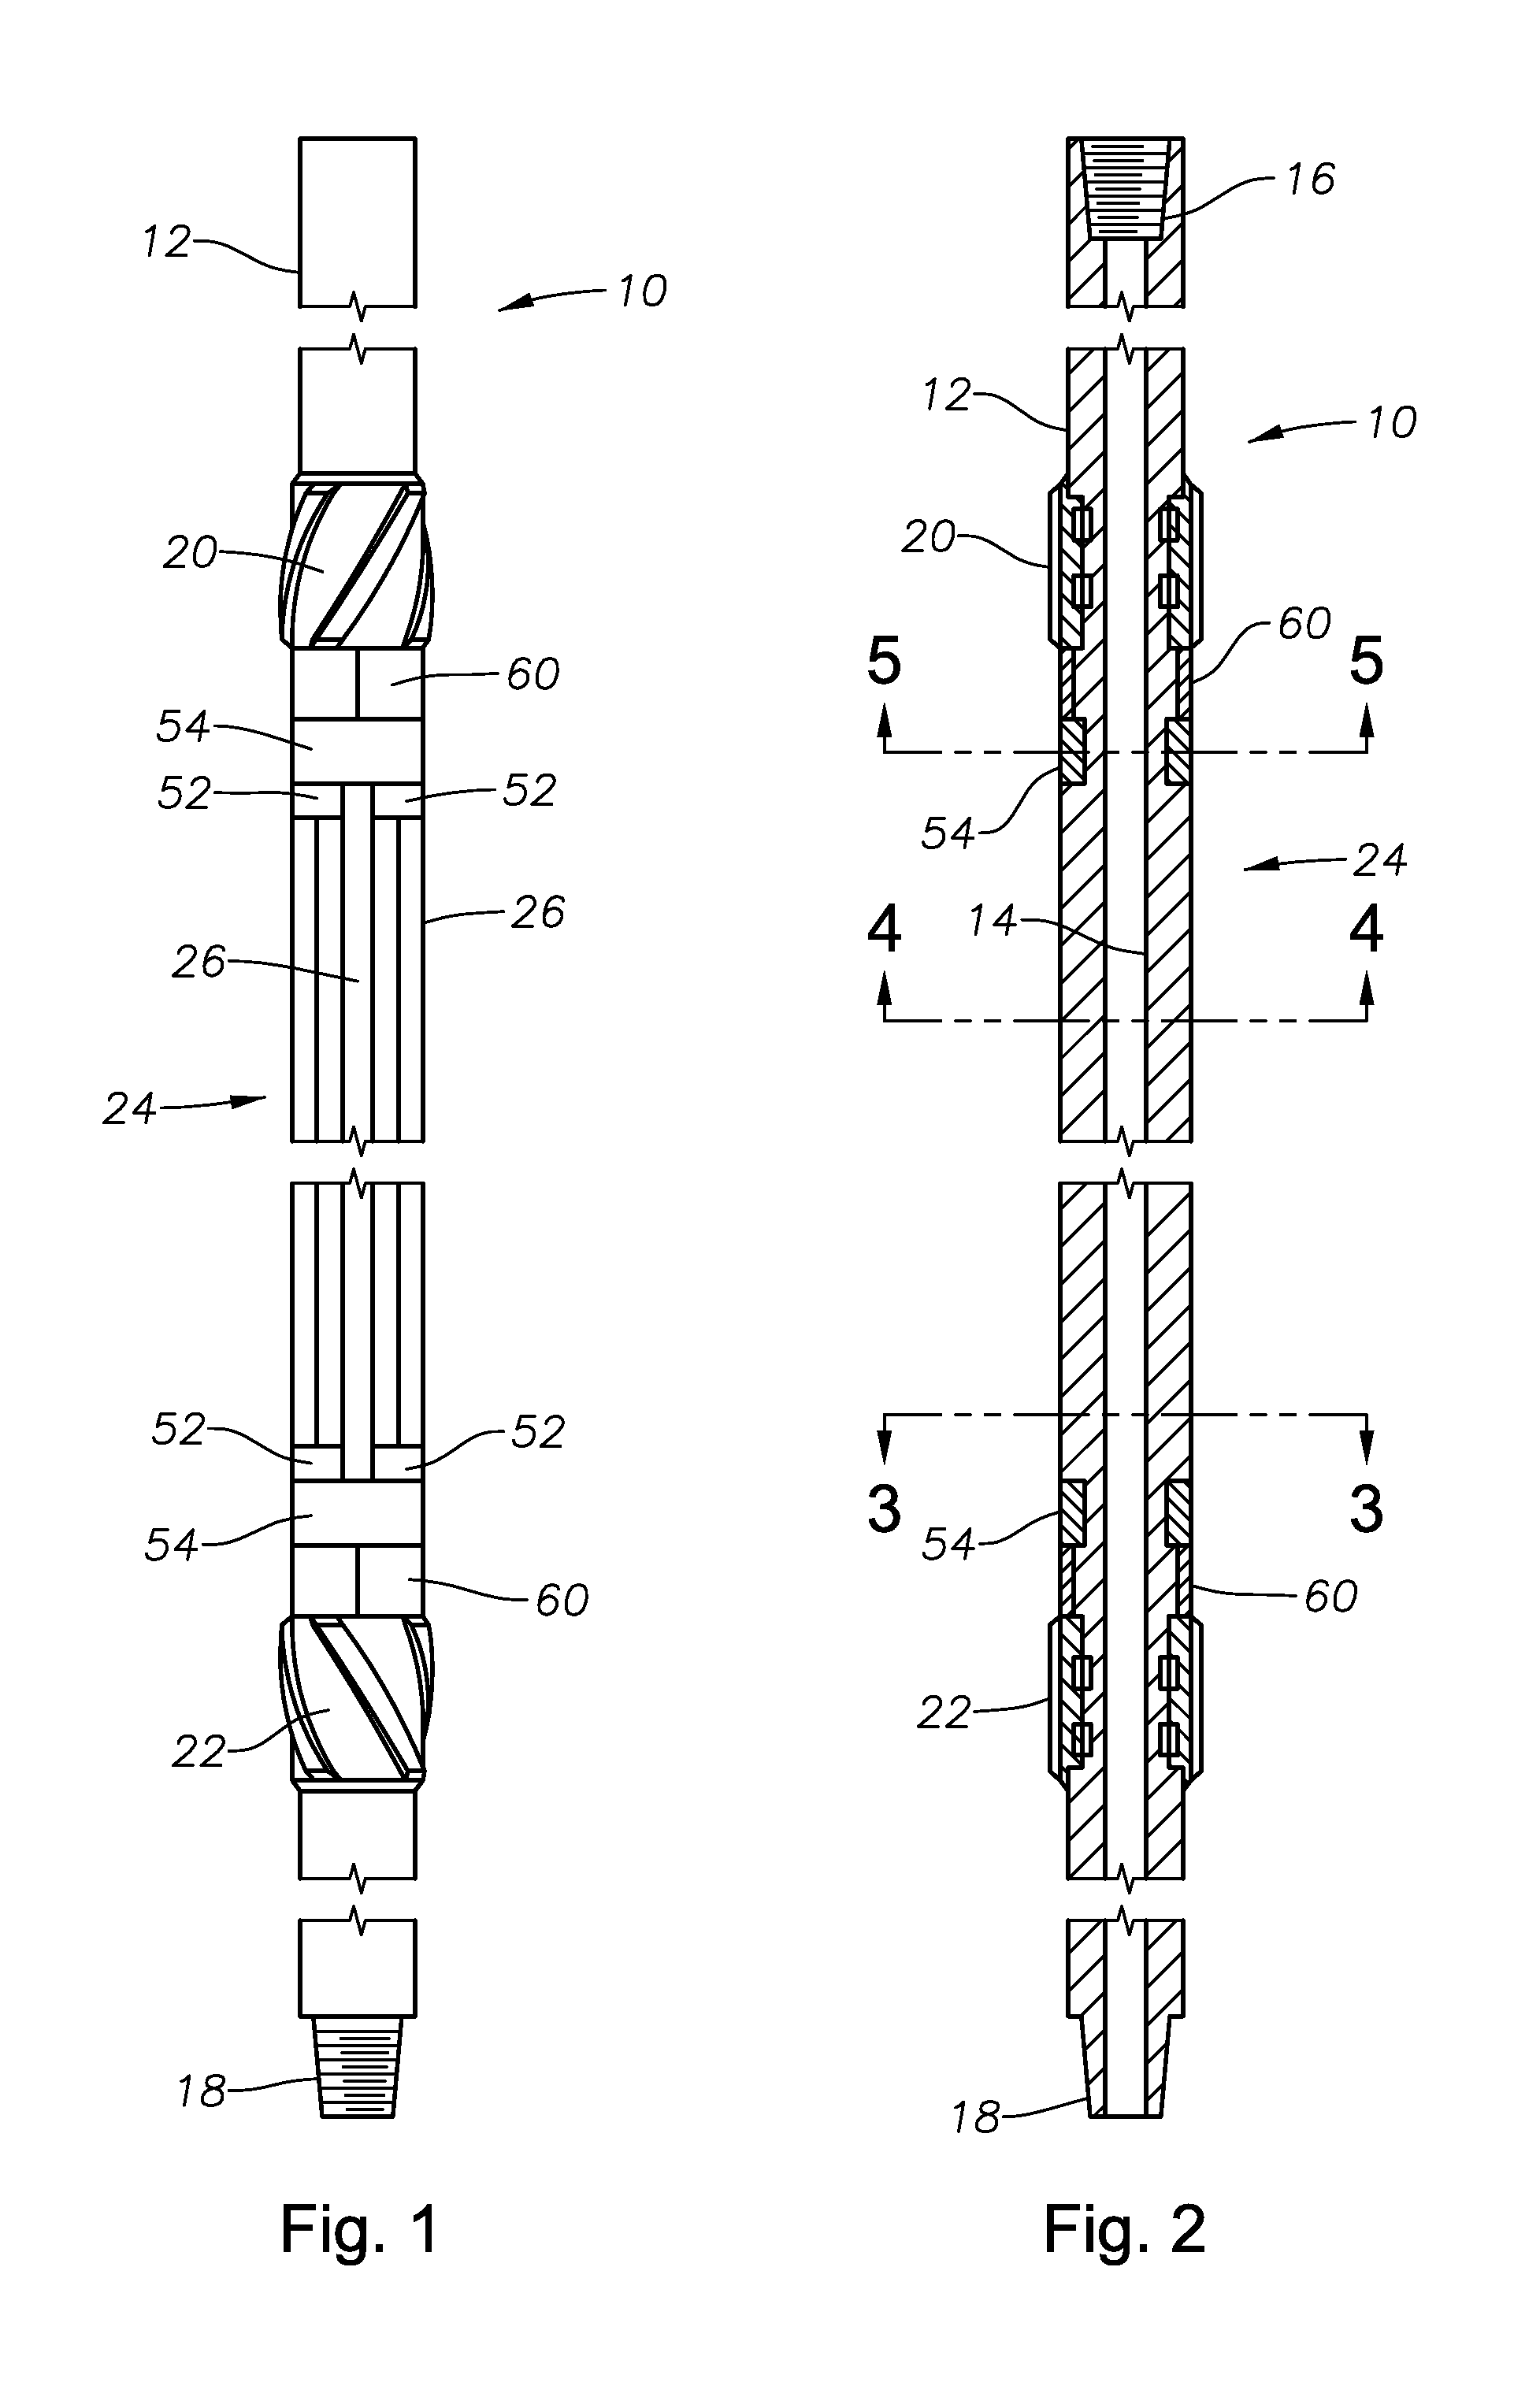 Magnetic Retrieval Apparatus and Method for Retaining Magnets on a Downhole Magnetic Retrieval Apparatus